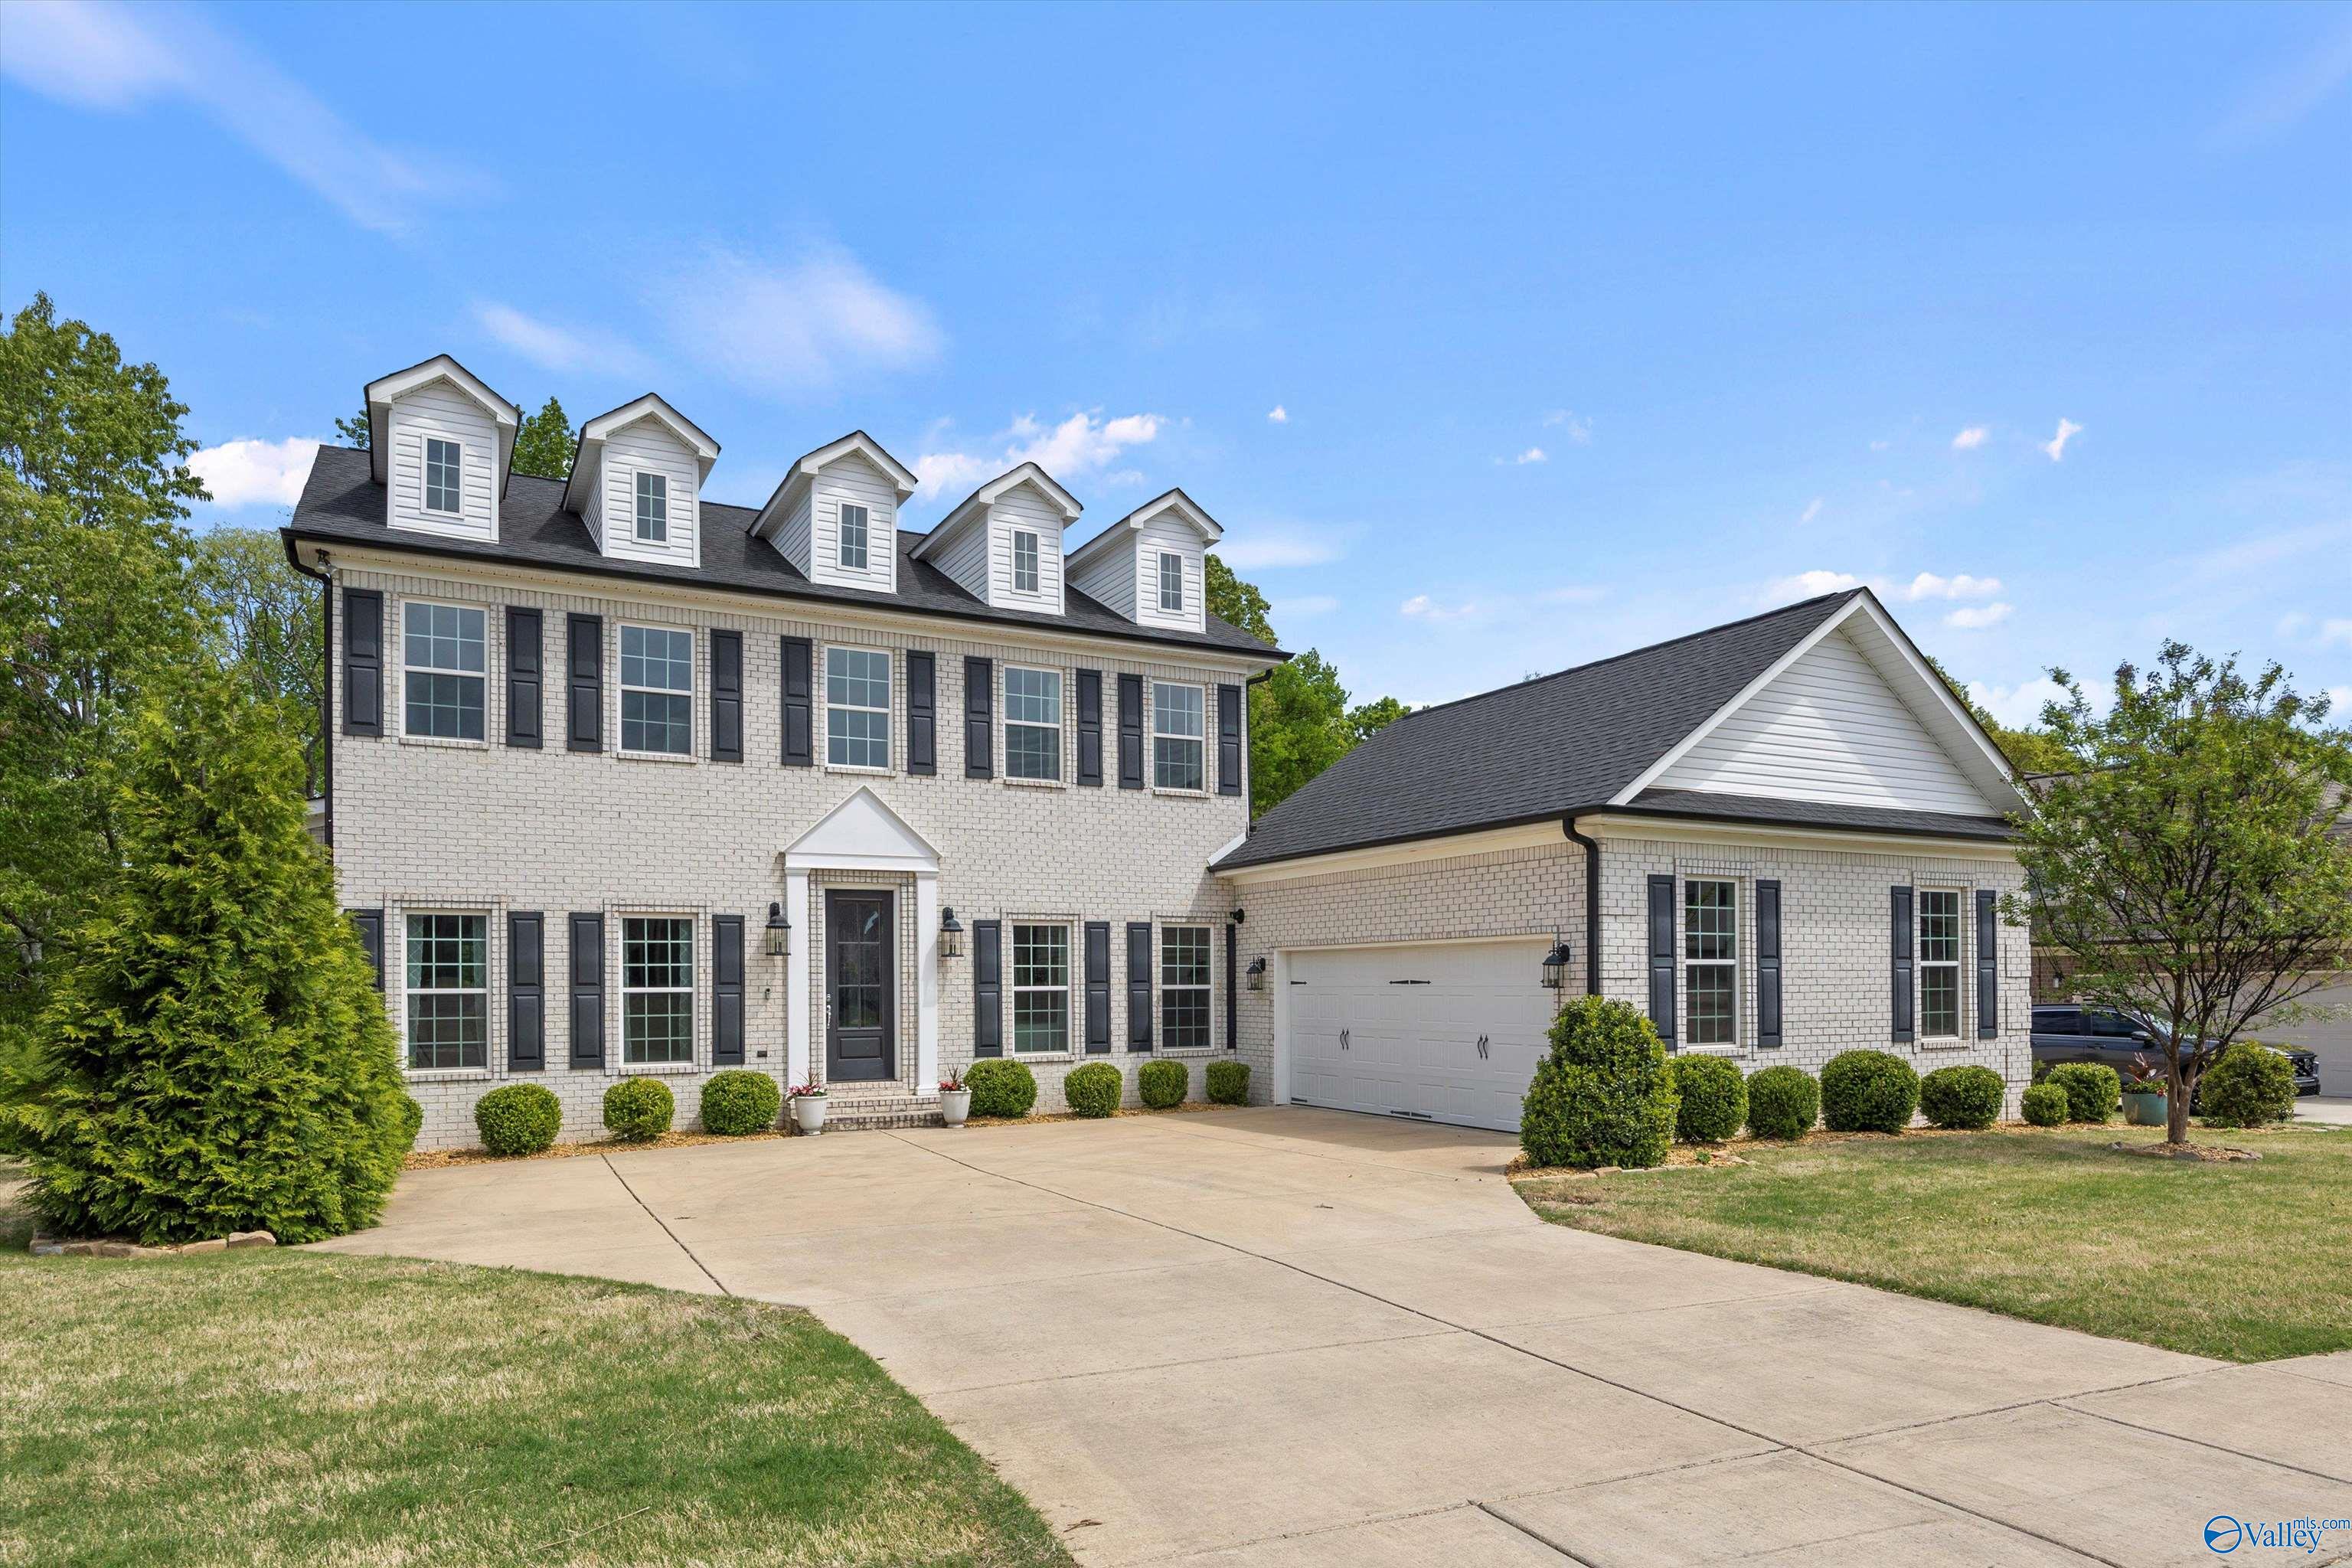 Property: 22807 Bluffview Drive,Athens, AL